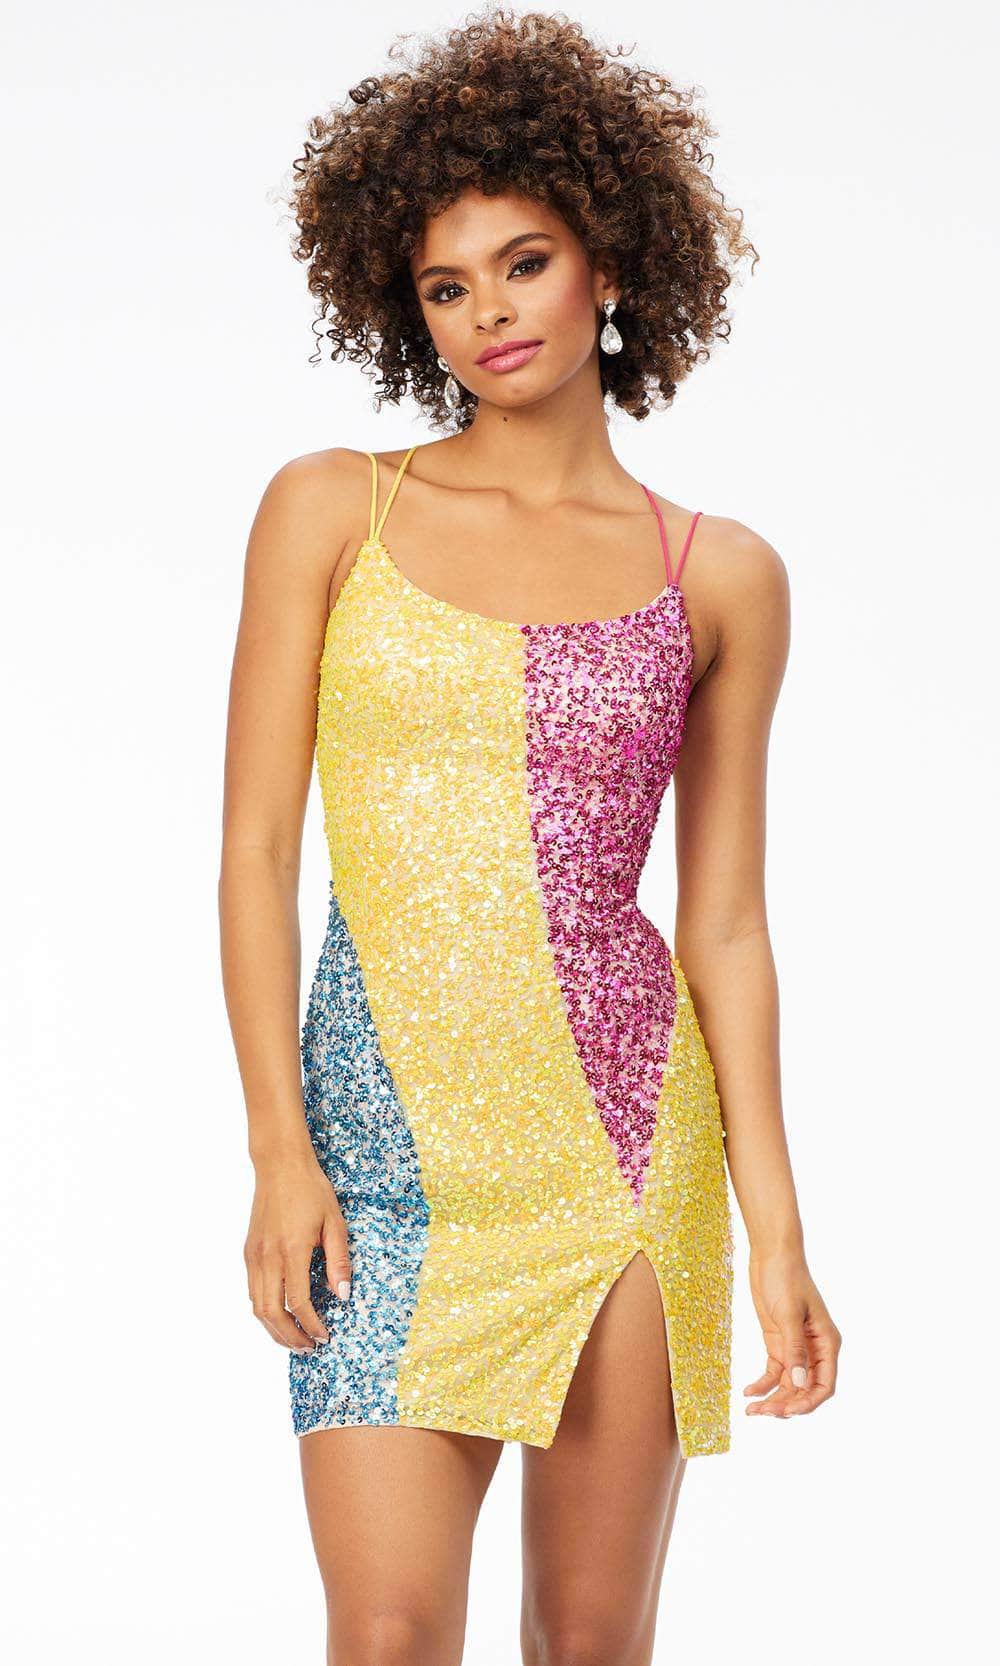 Ashley Lauren 4502 - Sleeveless Sequin Cocktail Dress Special Occasion Dress 00 / Yellow/Multi